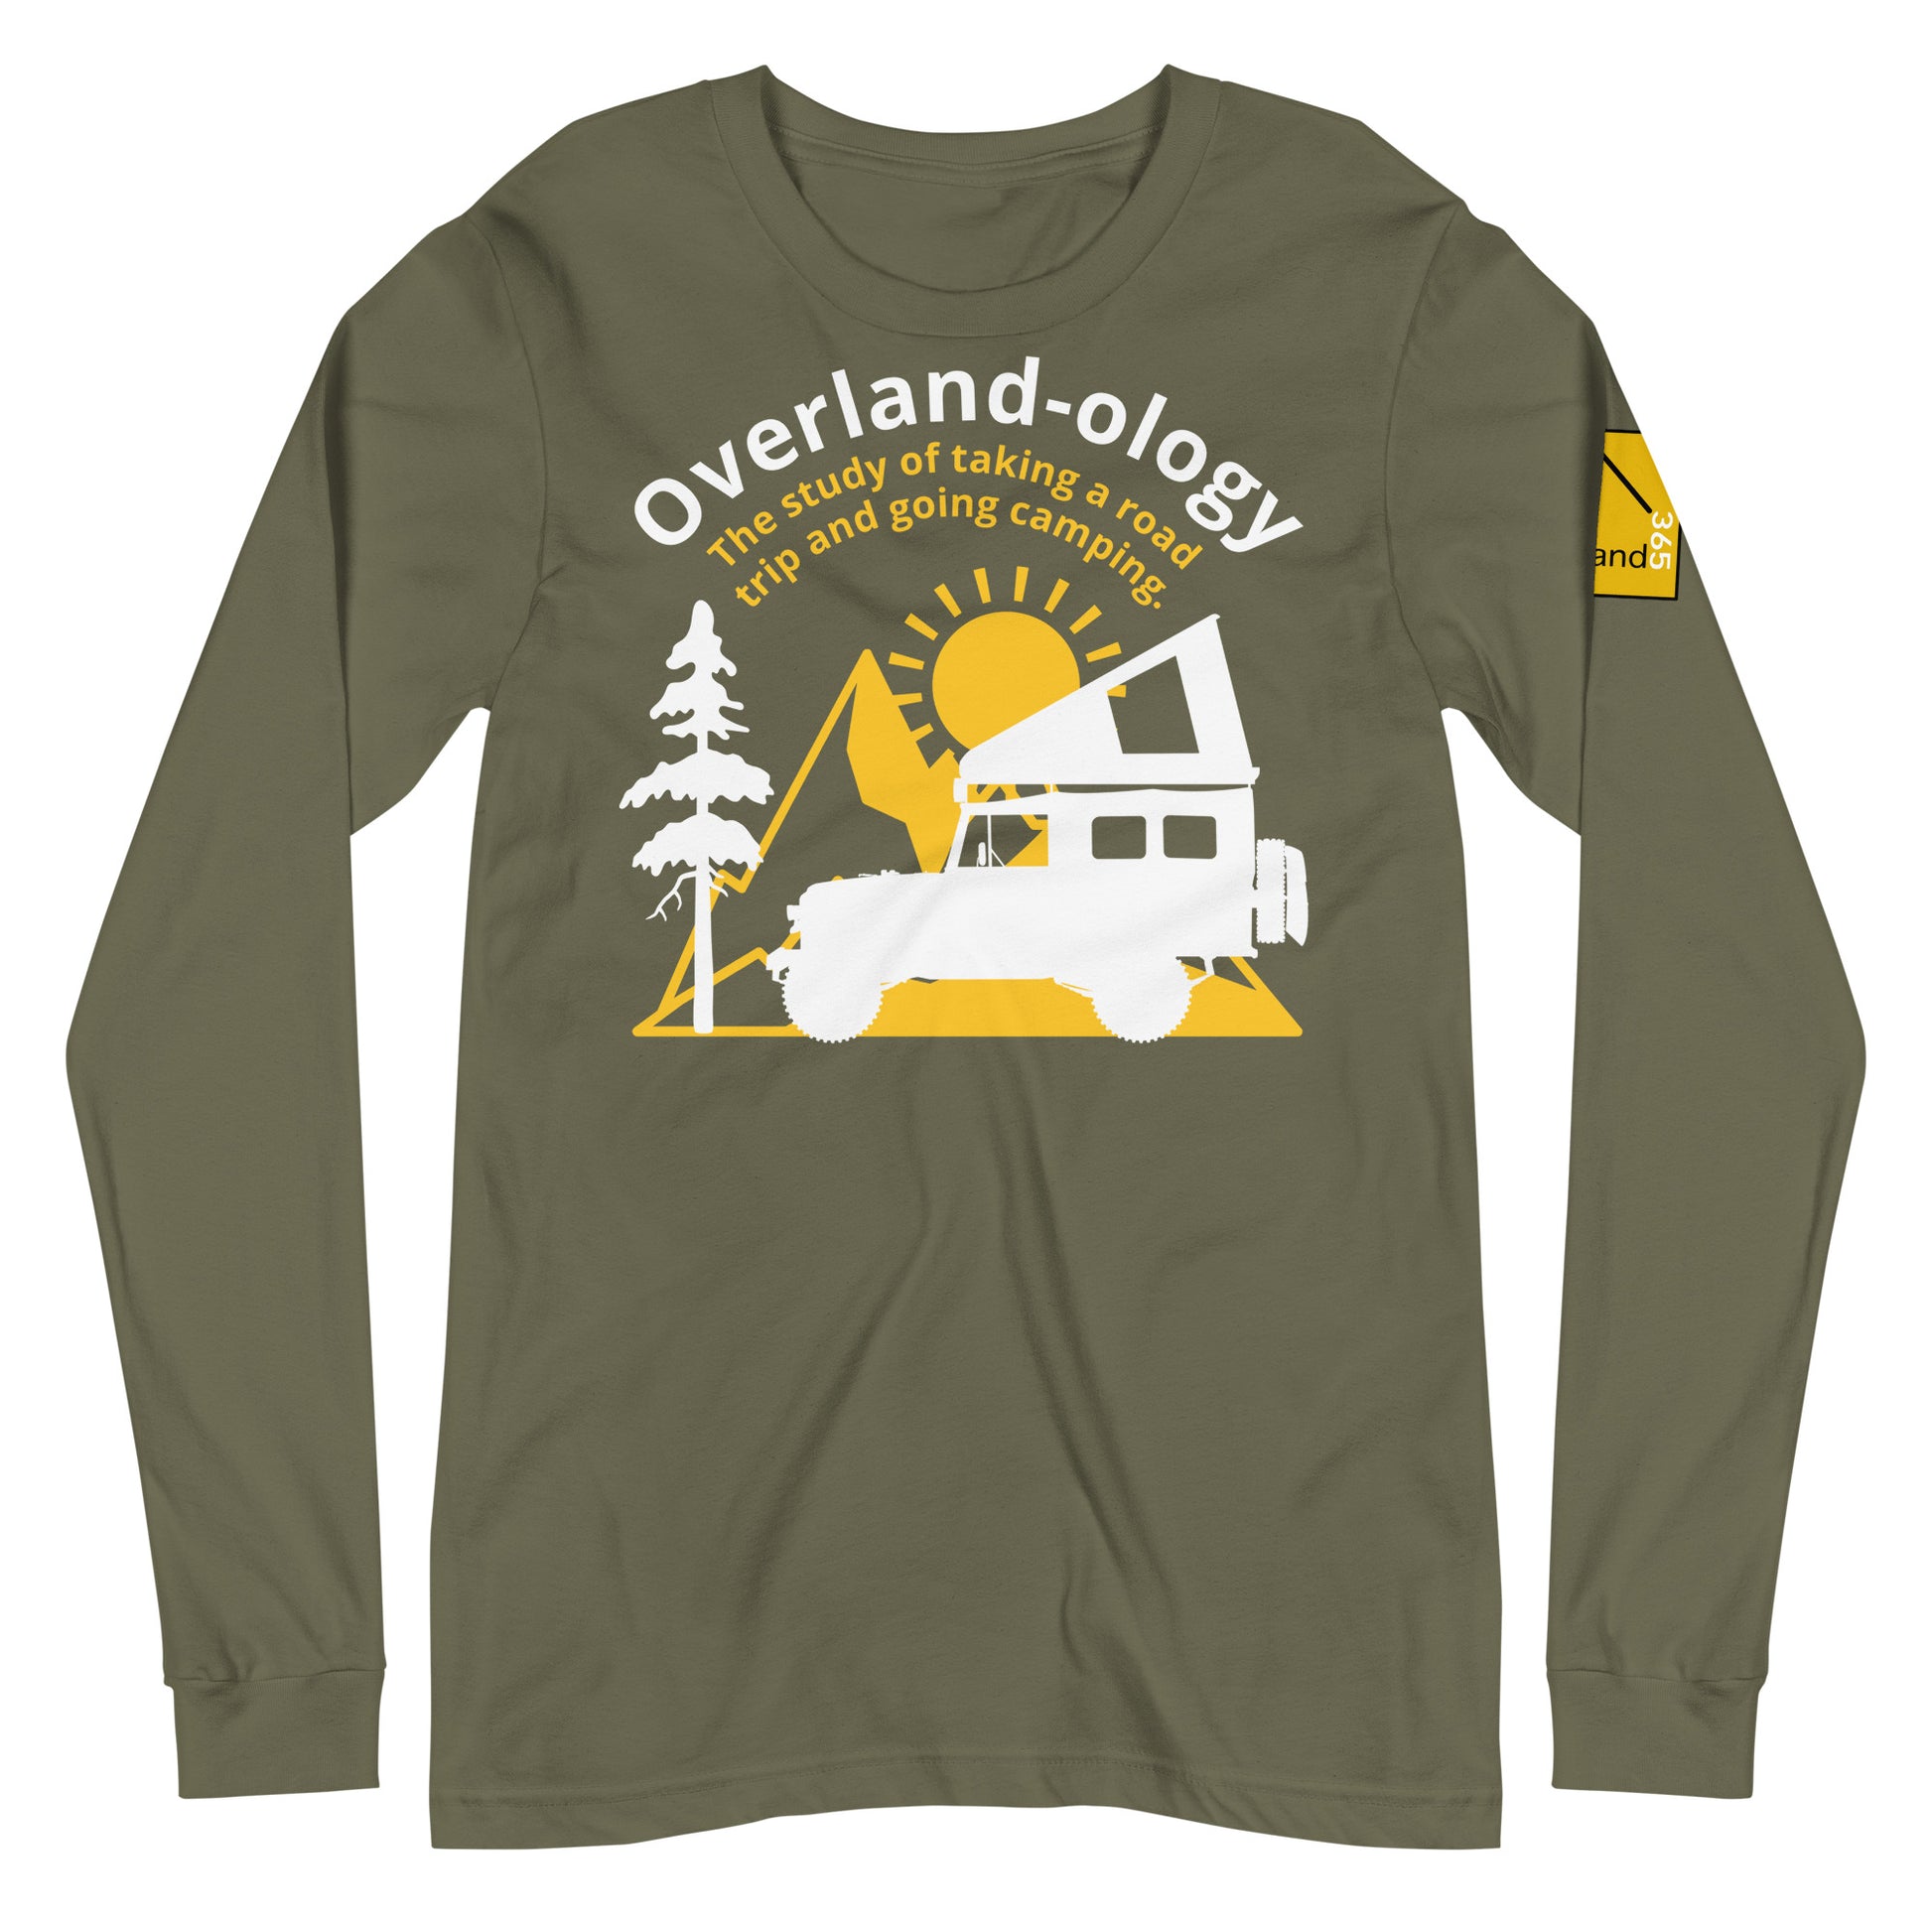 Overland-ology - The study of taking a road trip and going camping. Green long-sleeve. overland365.com